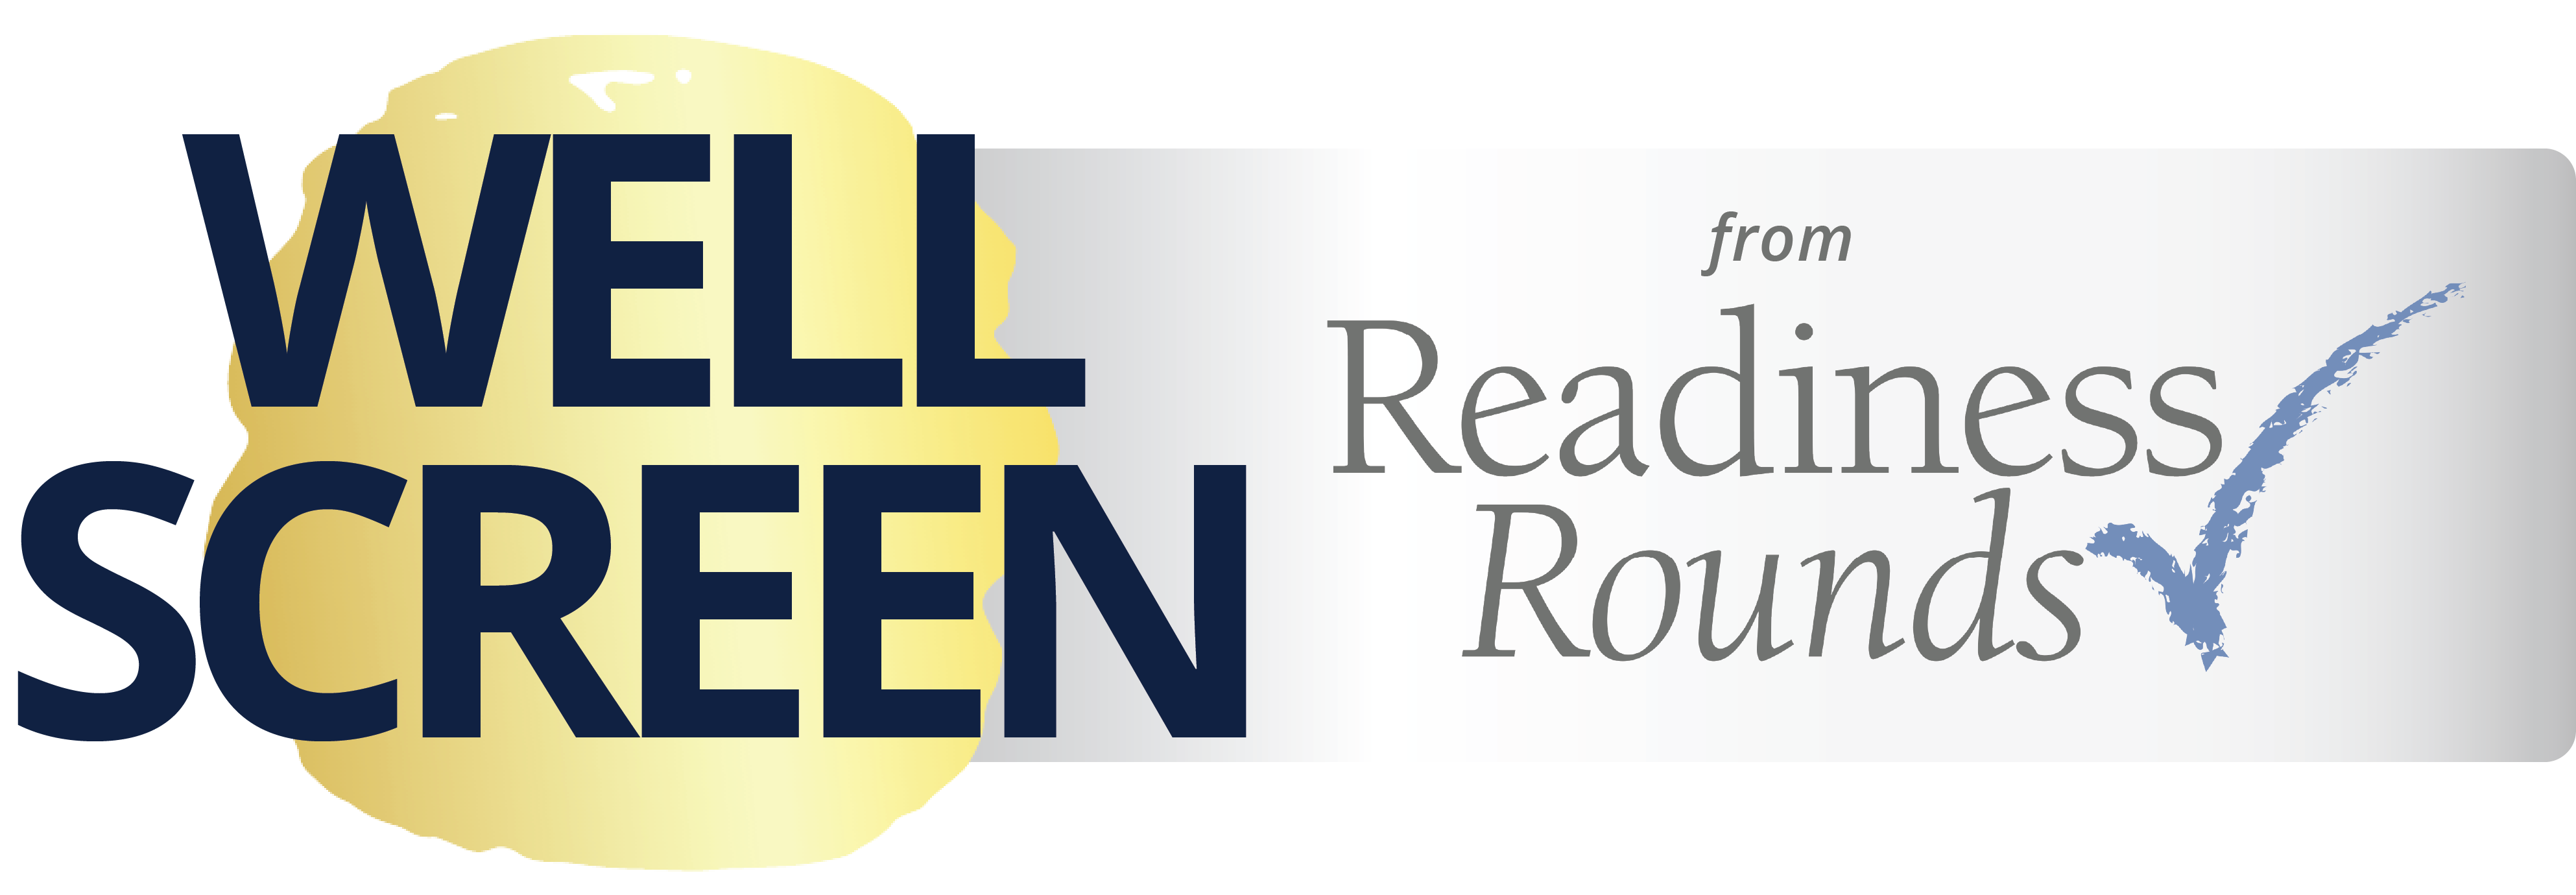 Well Screen from Readiness Rounds logo